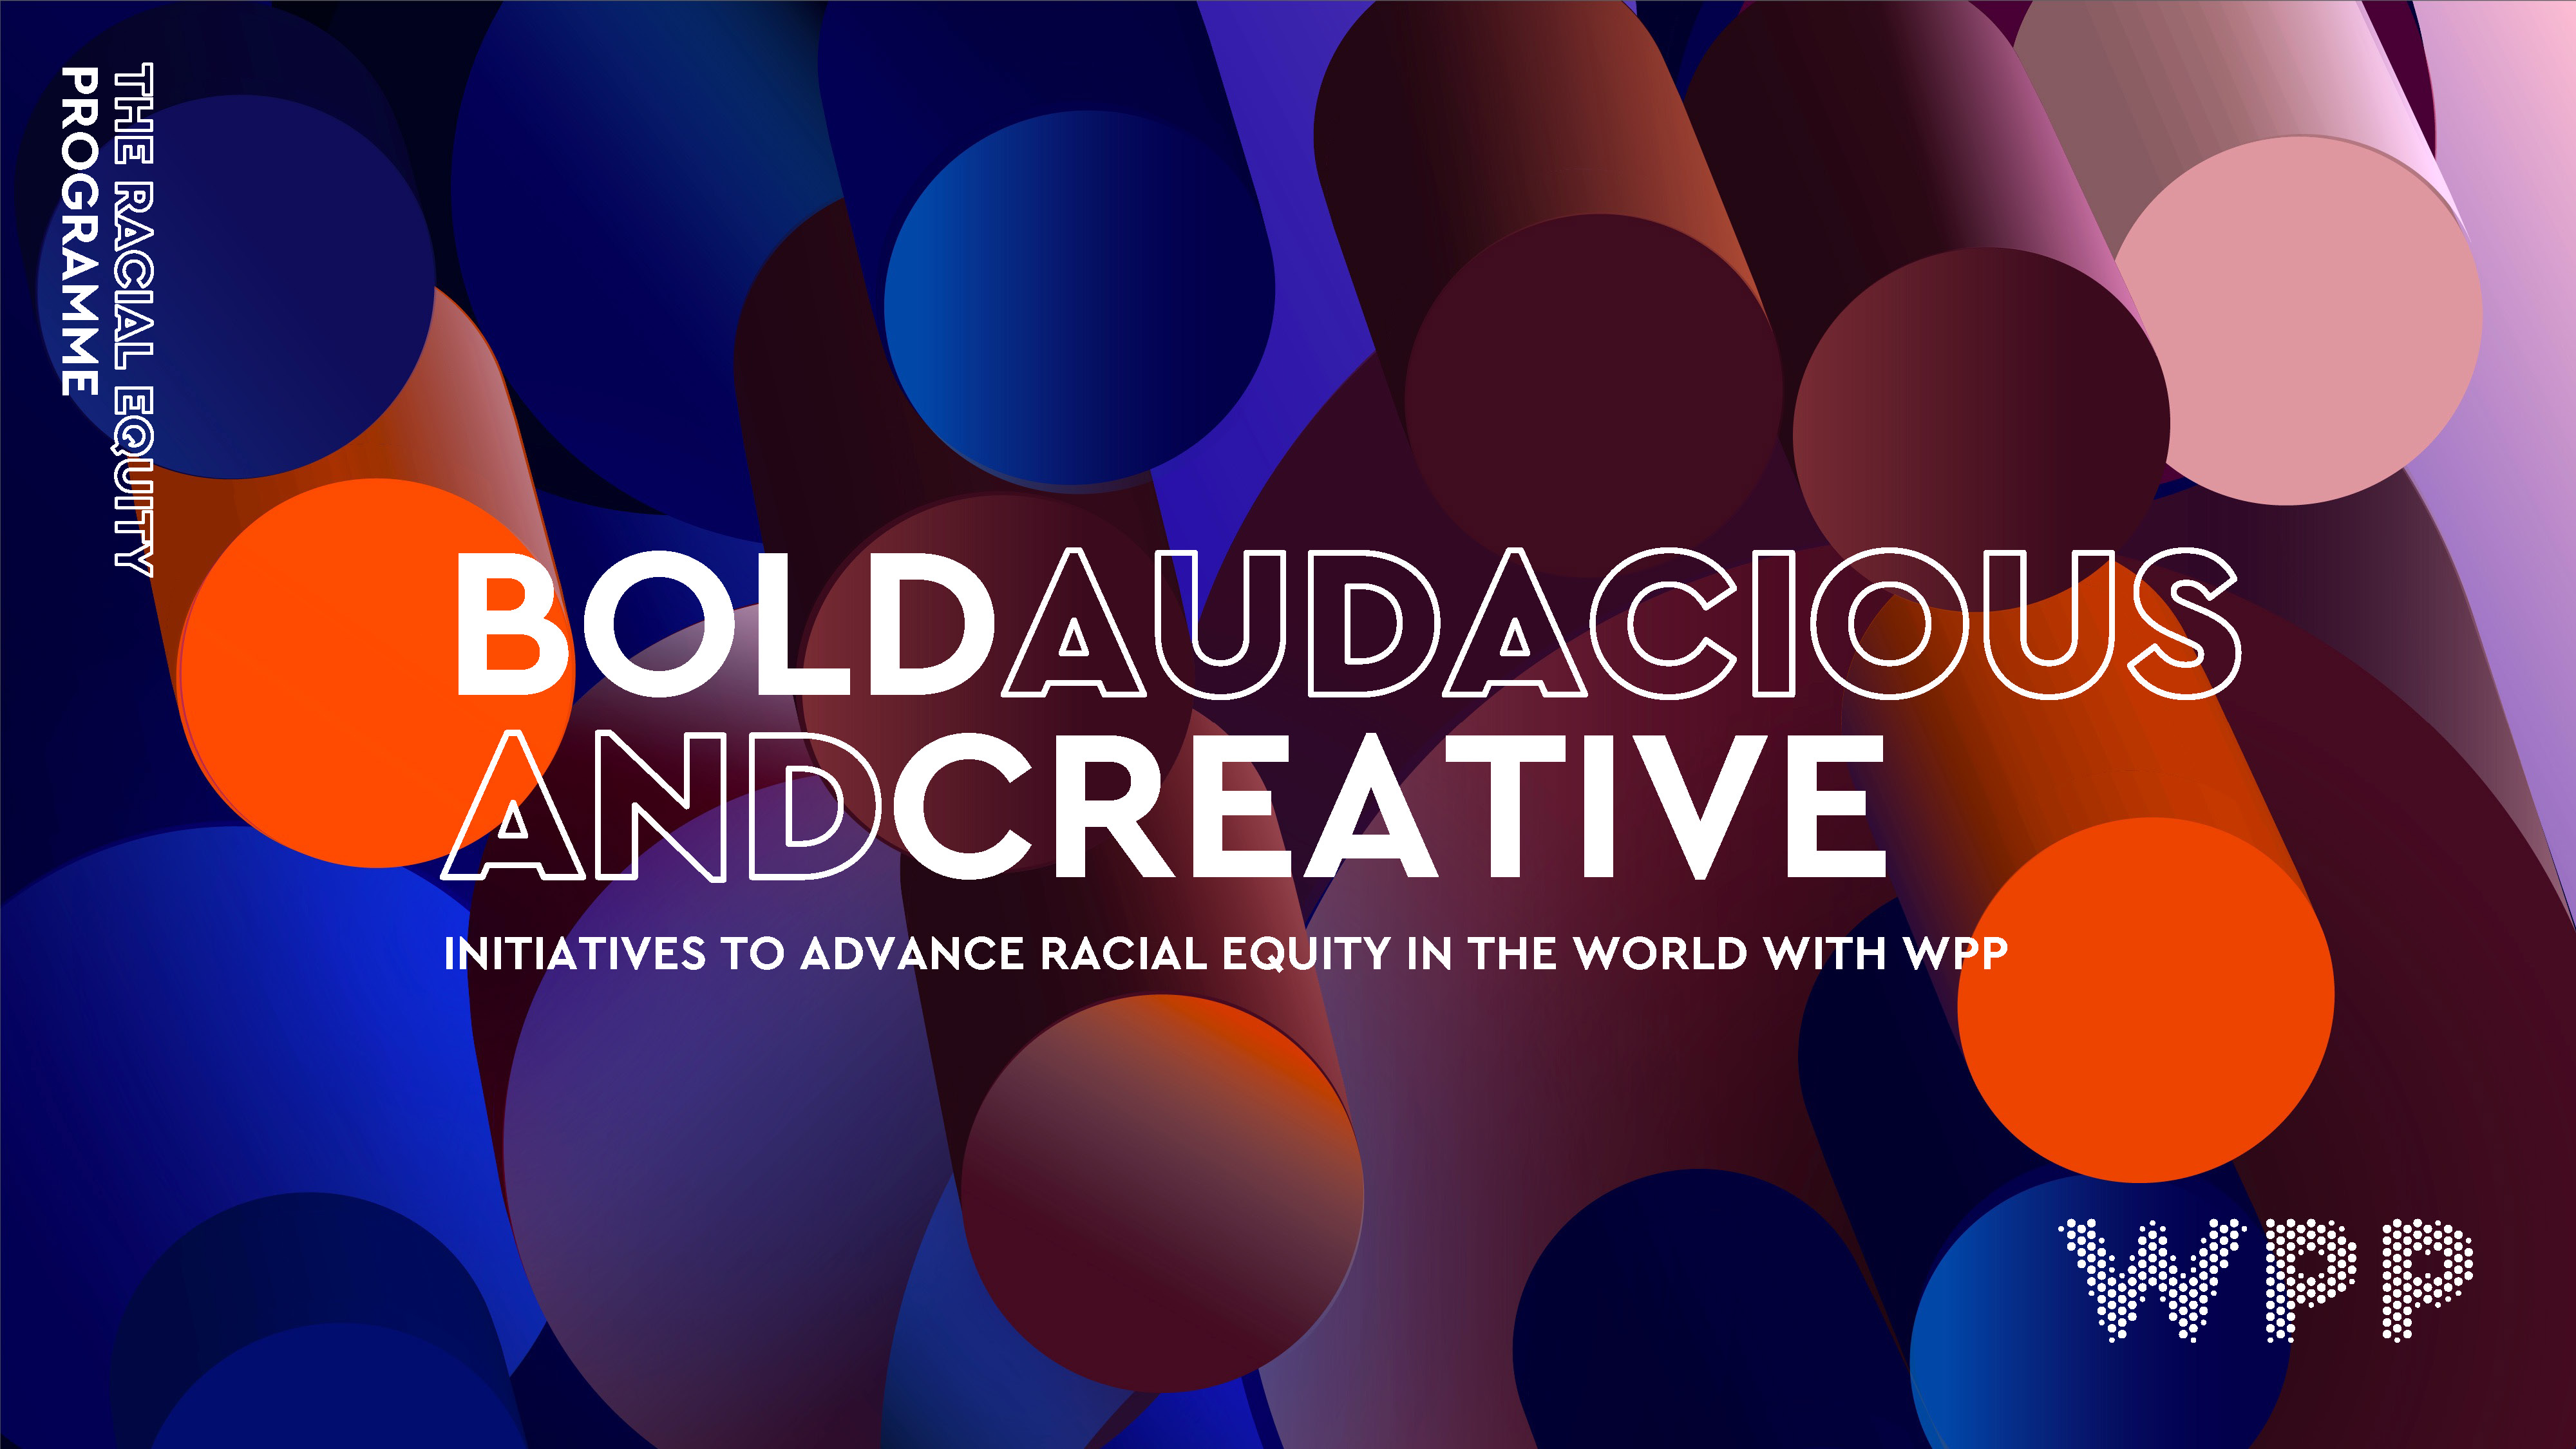 Graphic background with blue and orange circles with the words "Bold, audacious and creative. Initiatives to advance racial equity in the world with WPP"